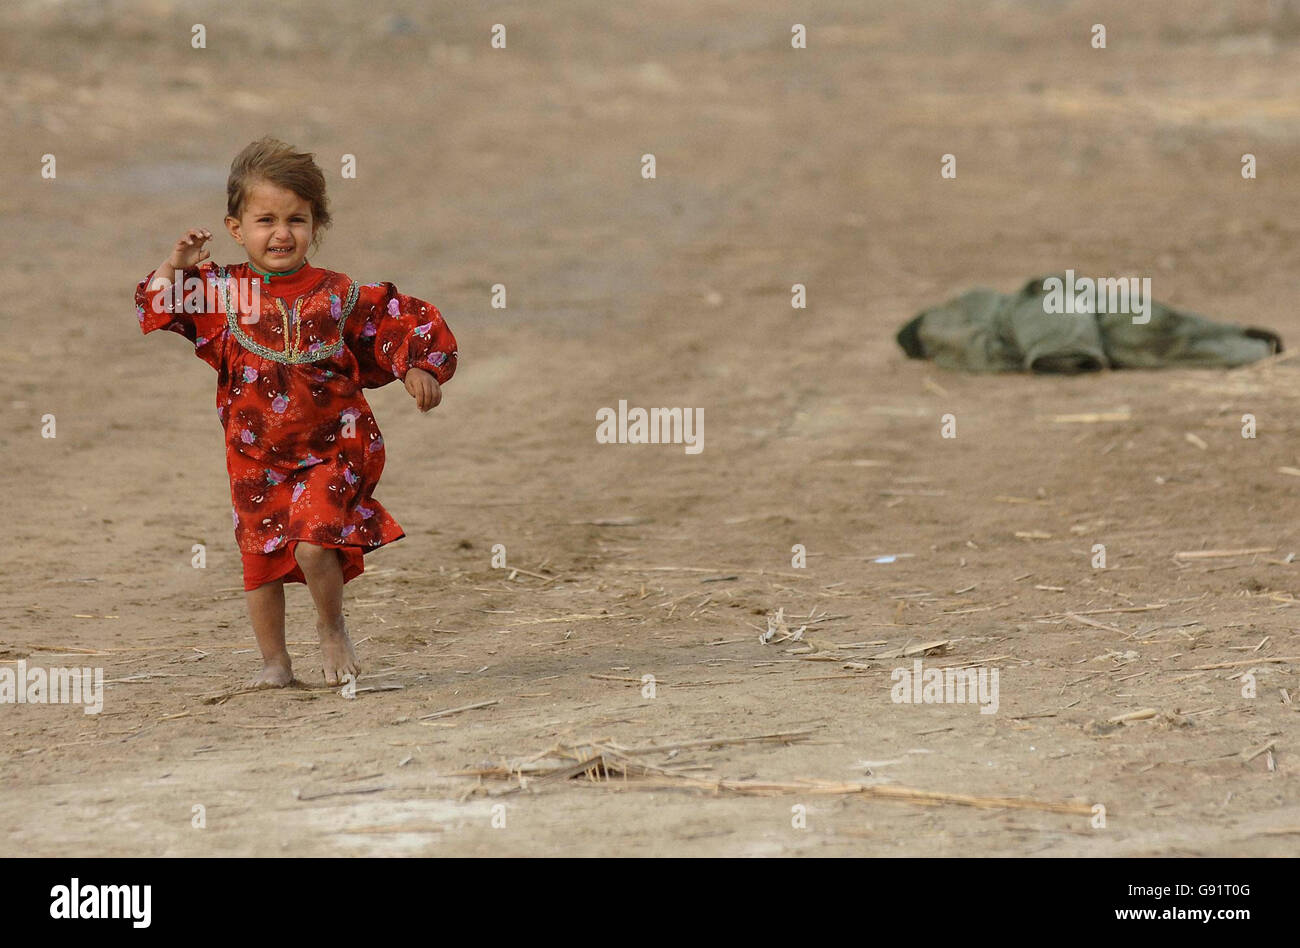 An Iraqi child runs towards her father as 1 Squadron RAF Regiment takes partin a routine patrol in the Marsh Arab region near Basrah. The marshes were drained during the former regime of Saddam Hussein meaning hardship and poverty for many of the Marsh Arabs. Stock Photo